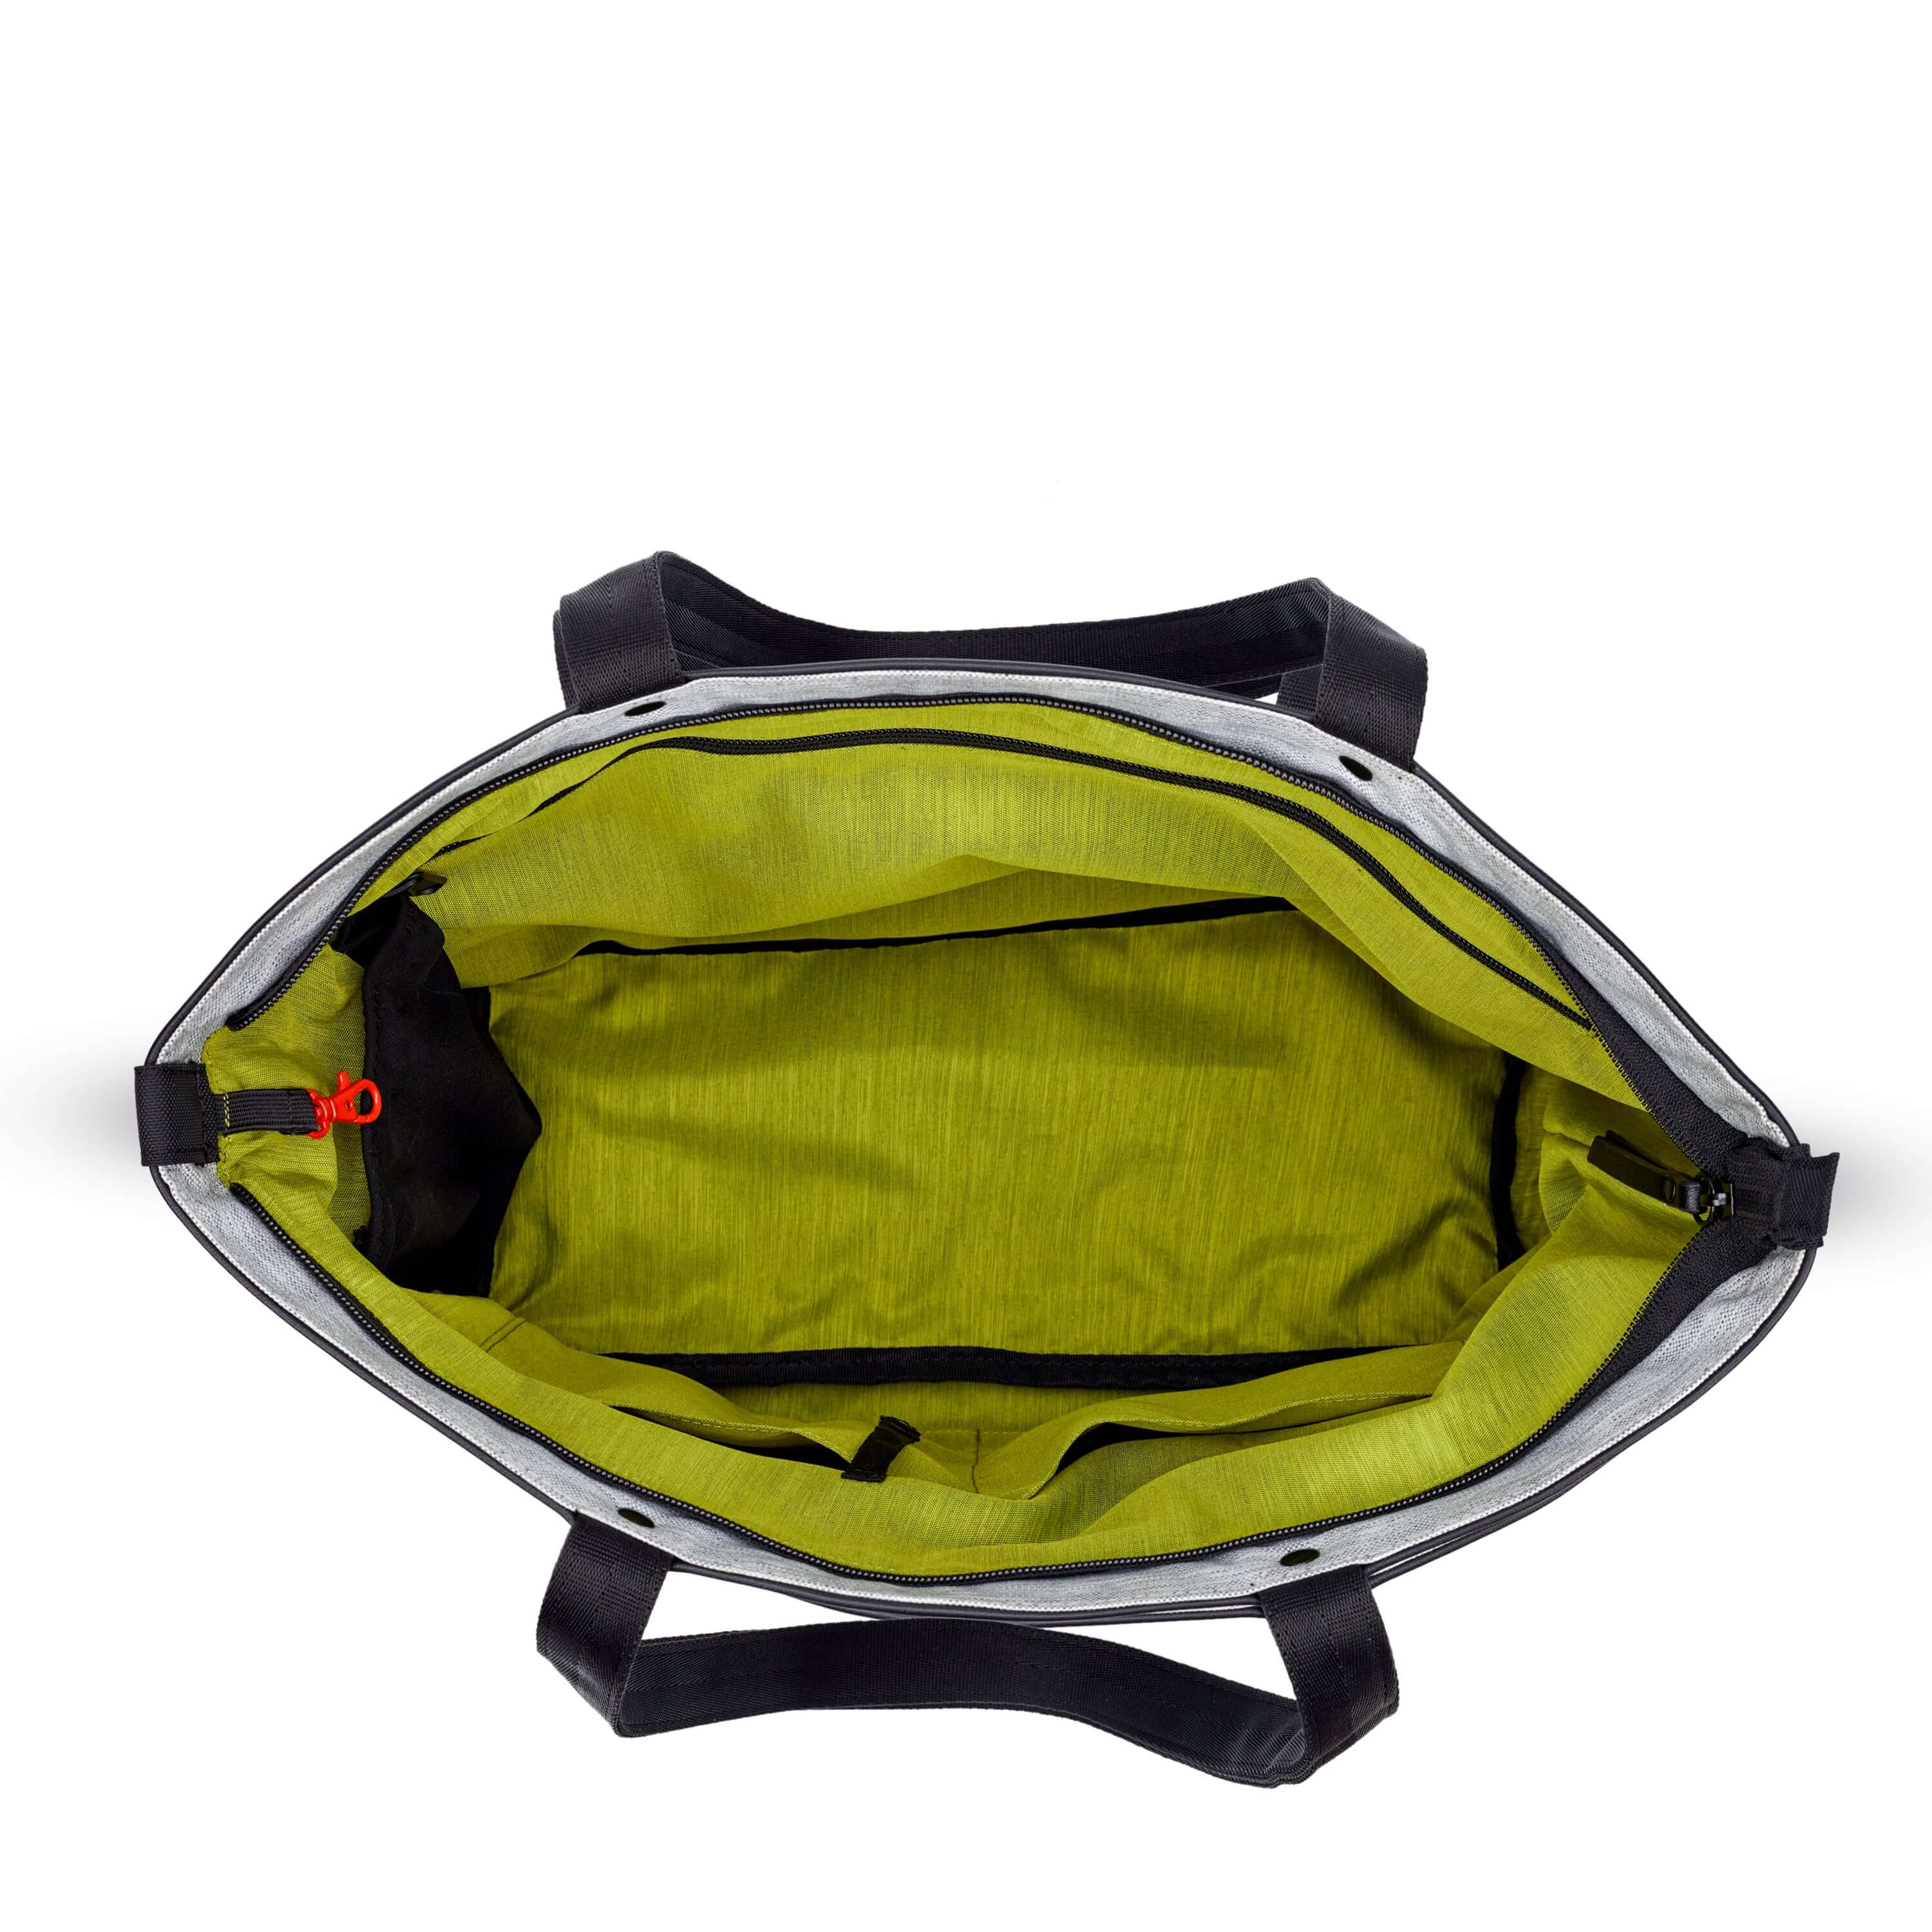 Top view of Sherpani's Anti-Theft tote the Cali AT in Sterling. The main zipper compartment is open to reveal a lime green interior, an internal water bottle holder and a red carabiner that acts as the zipper lock. 